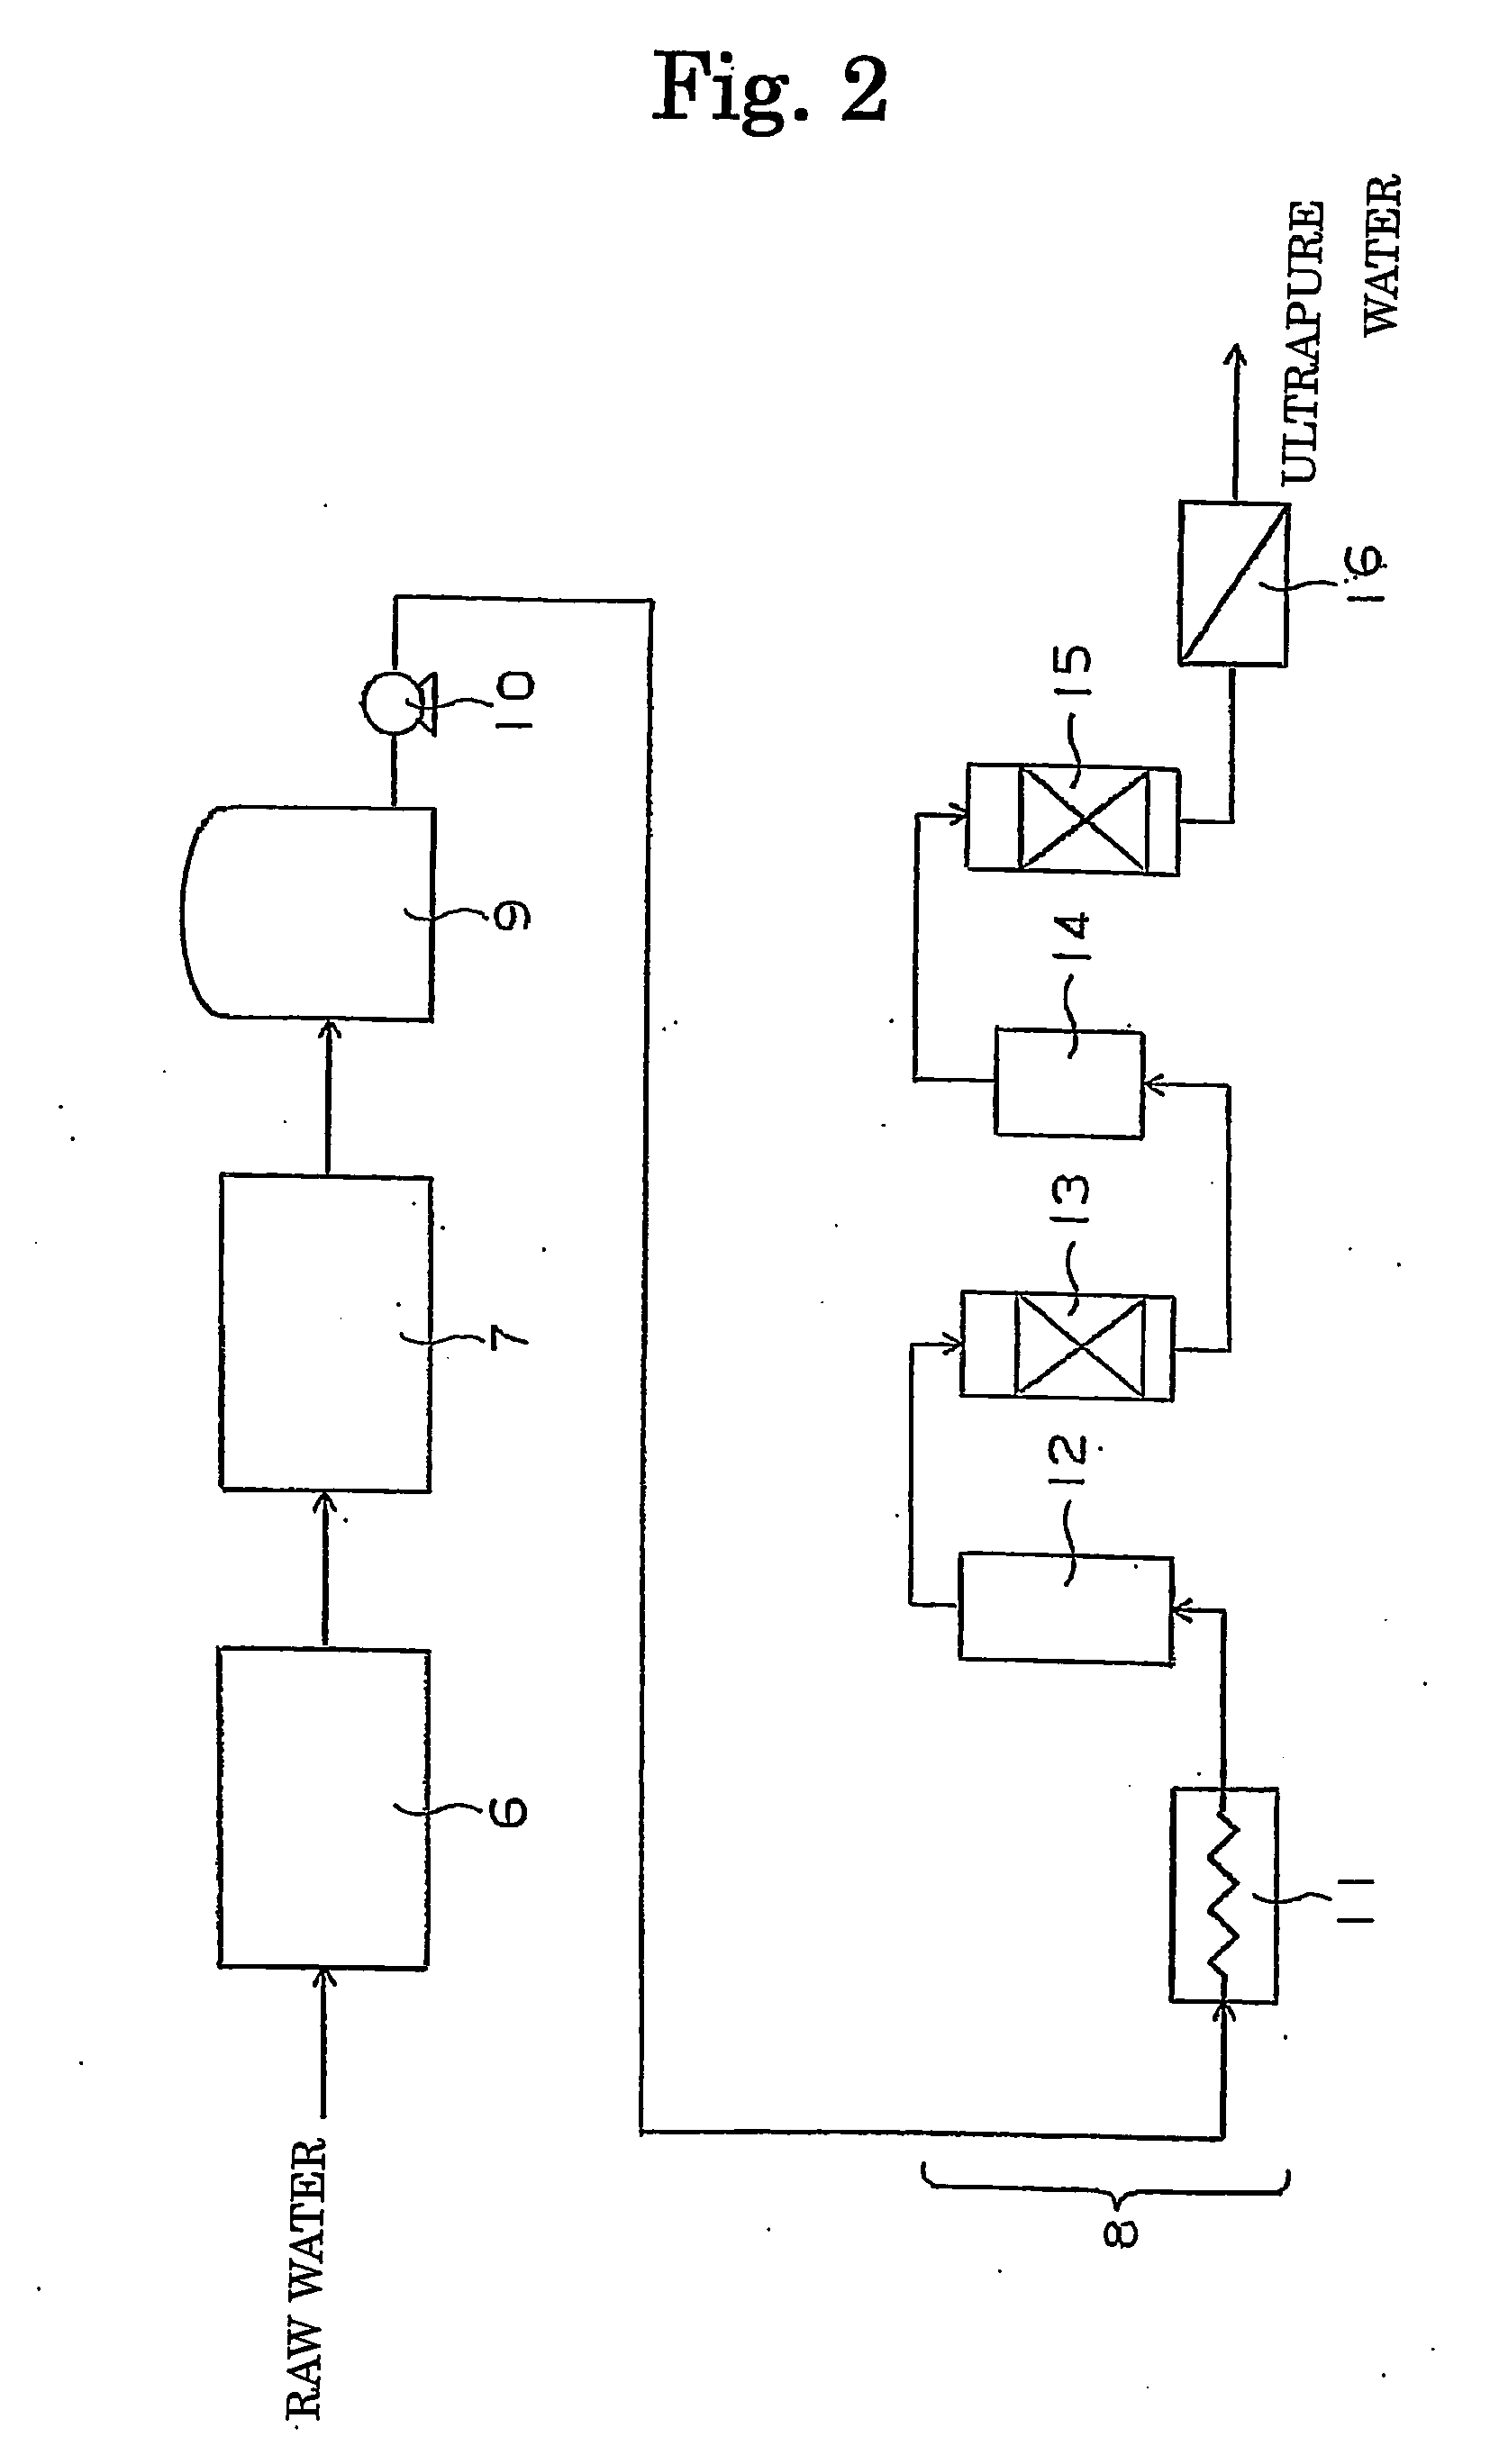 Process and Apparatus for Removing Hydrogen Peroxide